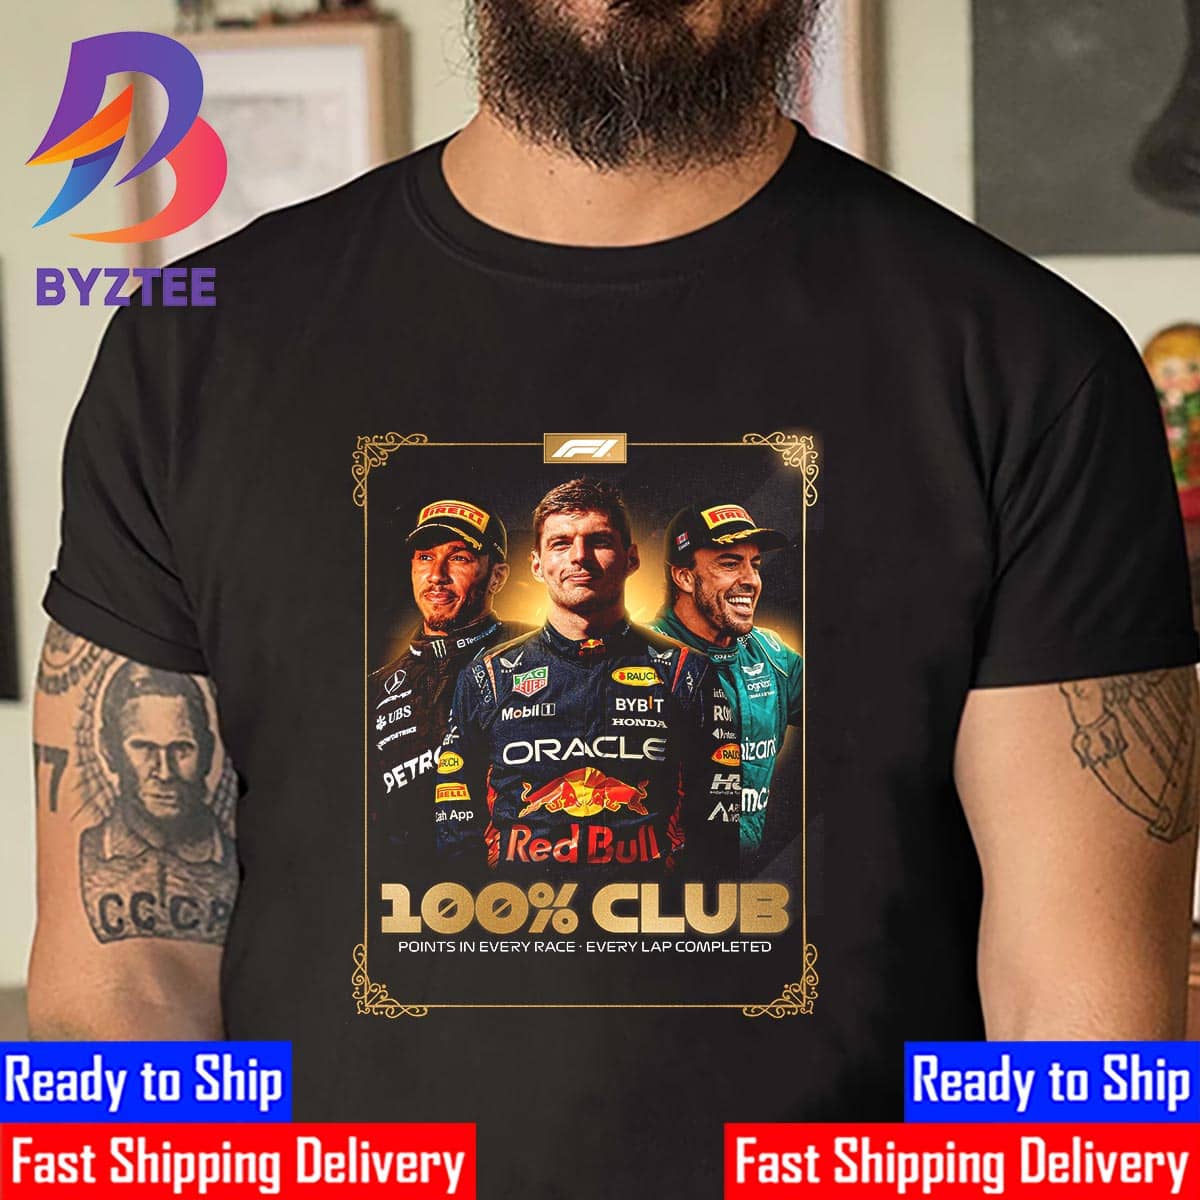 Formula 1 Max Verstappen Lewis Hamilton And Fernando Alonso 100% Club  Points In Every Race Every La Completed Shirt - Mugteeco